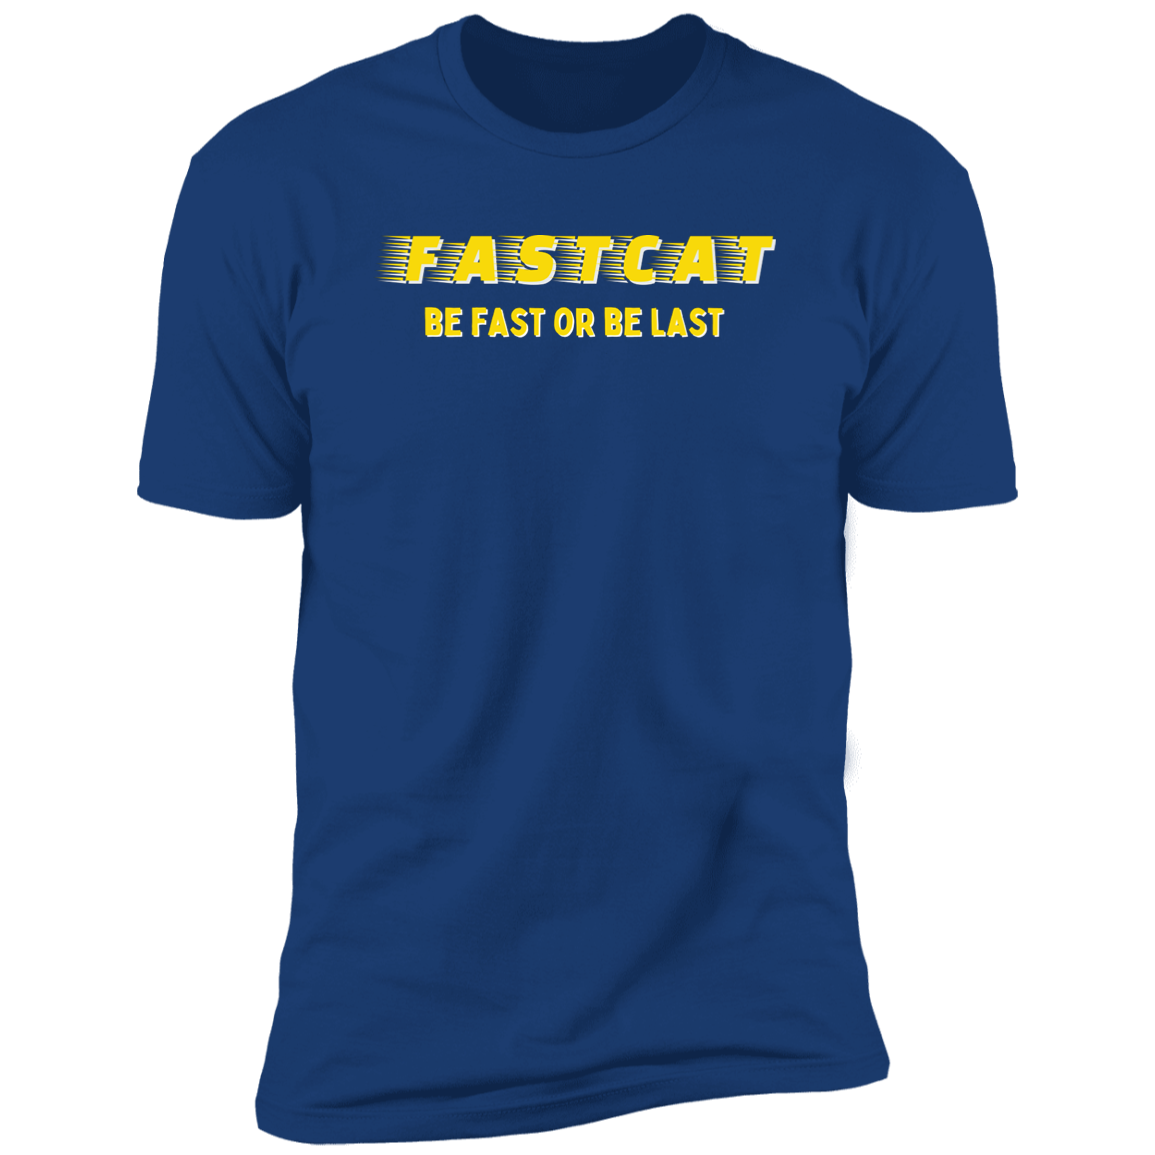 FastCAT Be Fast or Be Last Dog Sport T-shirt, FastCAT Shirt for humans, in royal blue